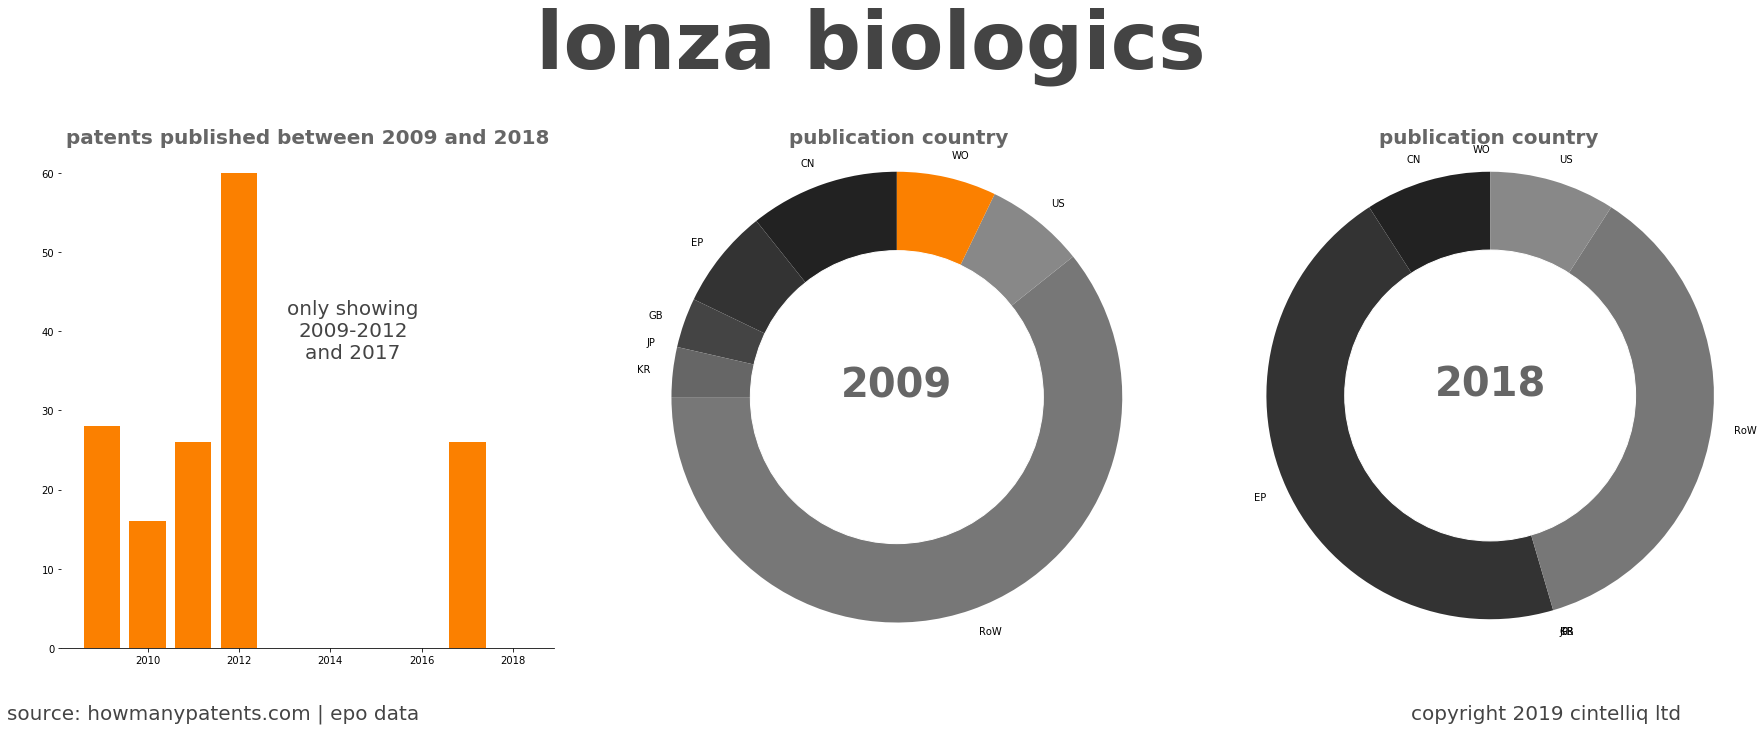 summary of patents for Lonza Biologics